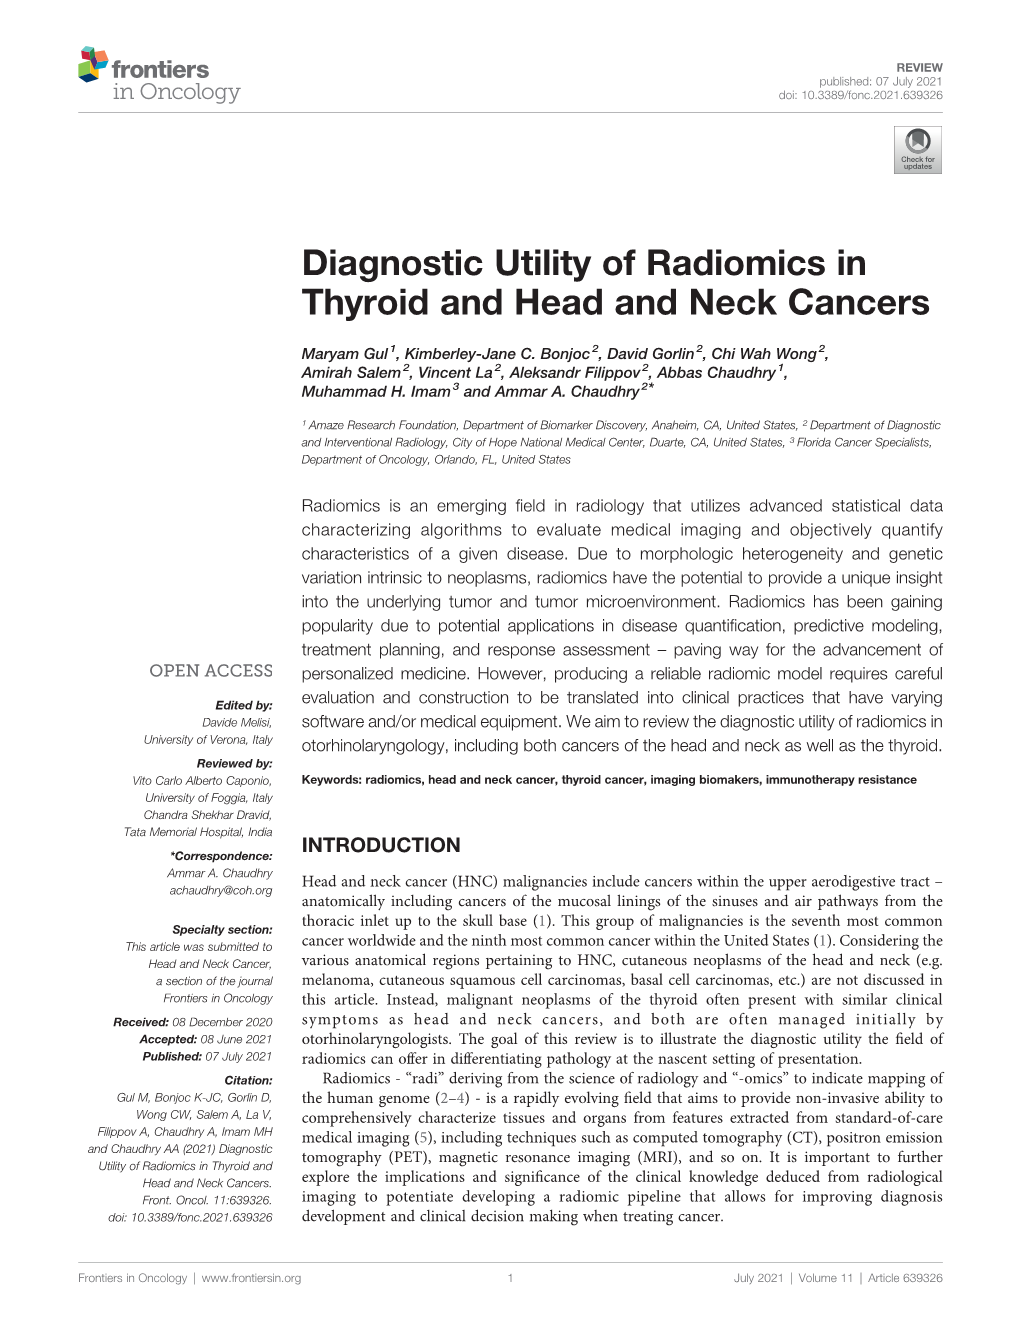 Diagnostic Utility of Radiomics in Thyroid and Head and Neck Cancers